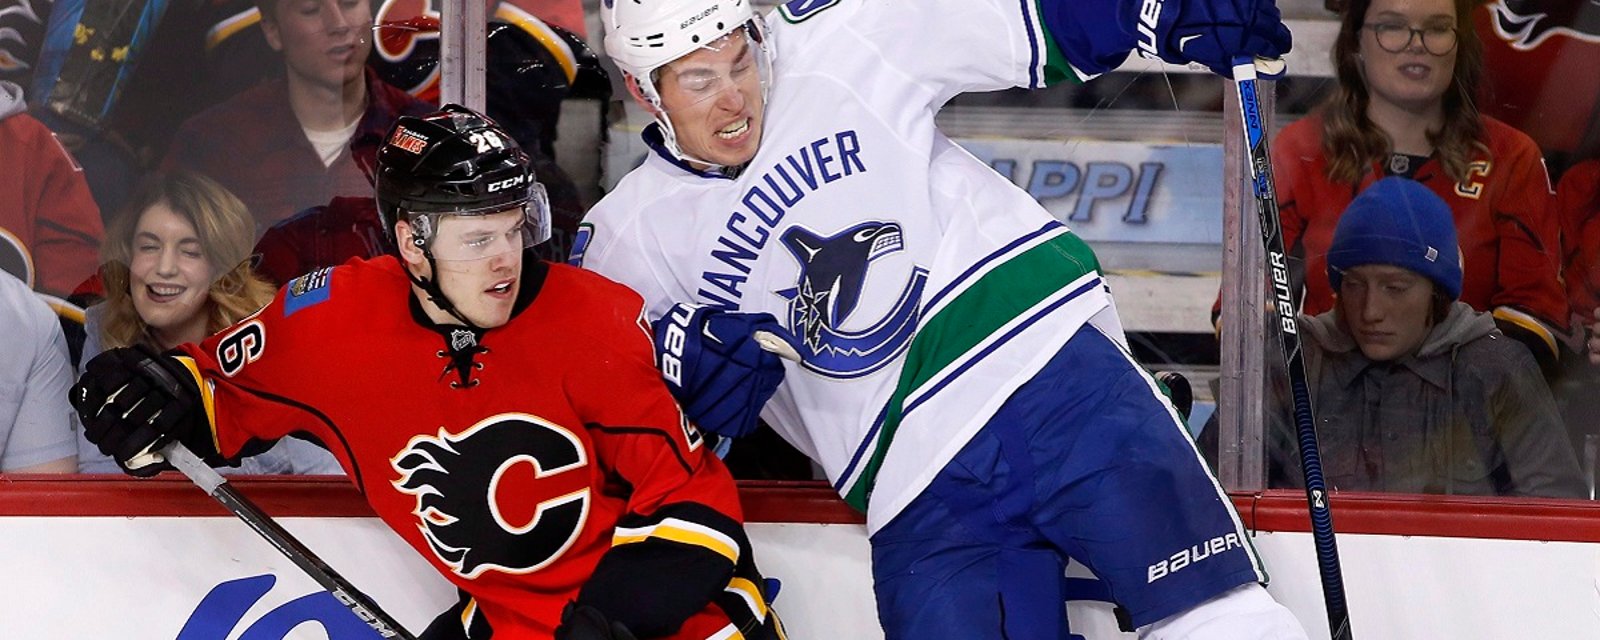 Report: Flames sign young defenseman to a new contract on Tuesday.